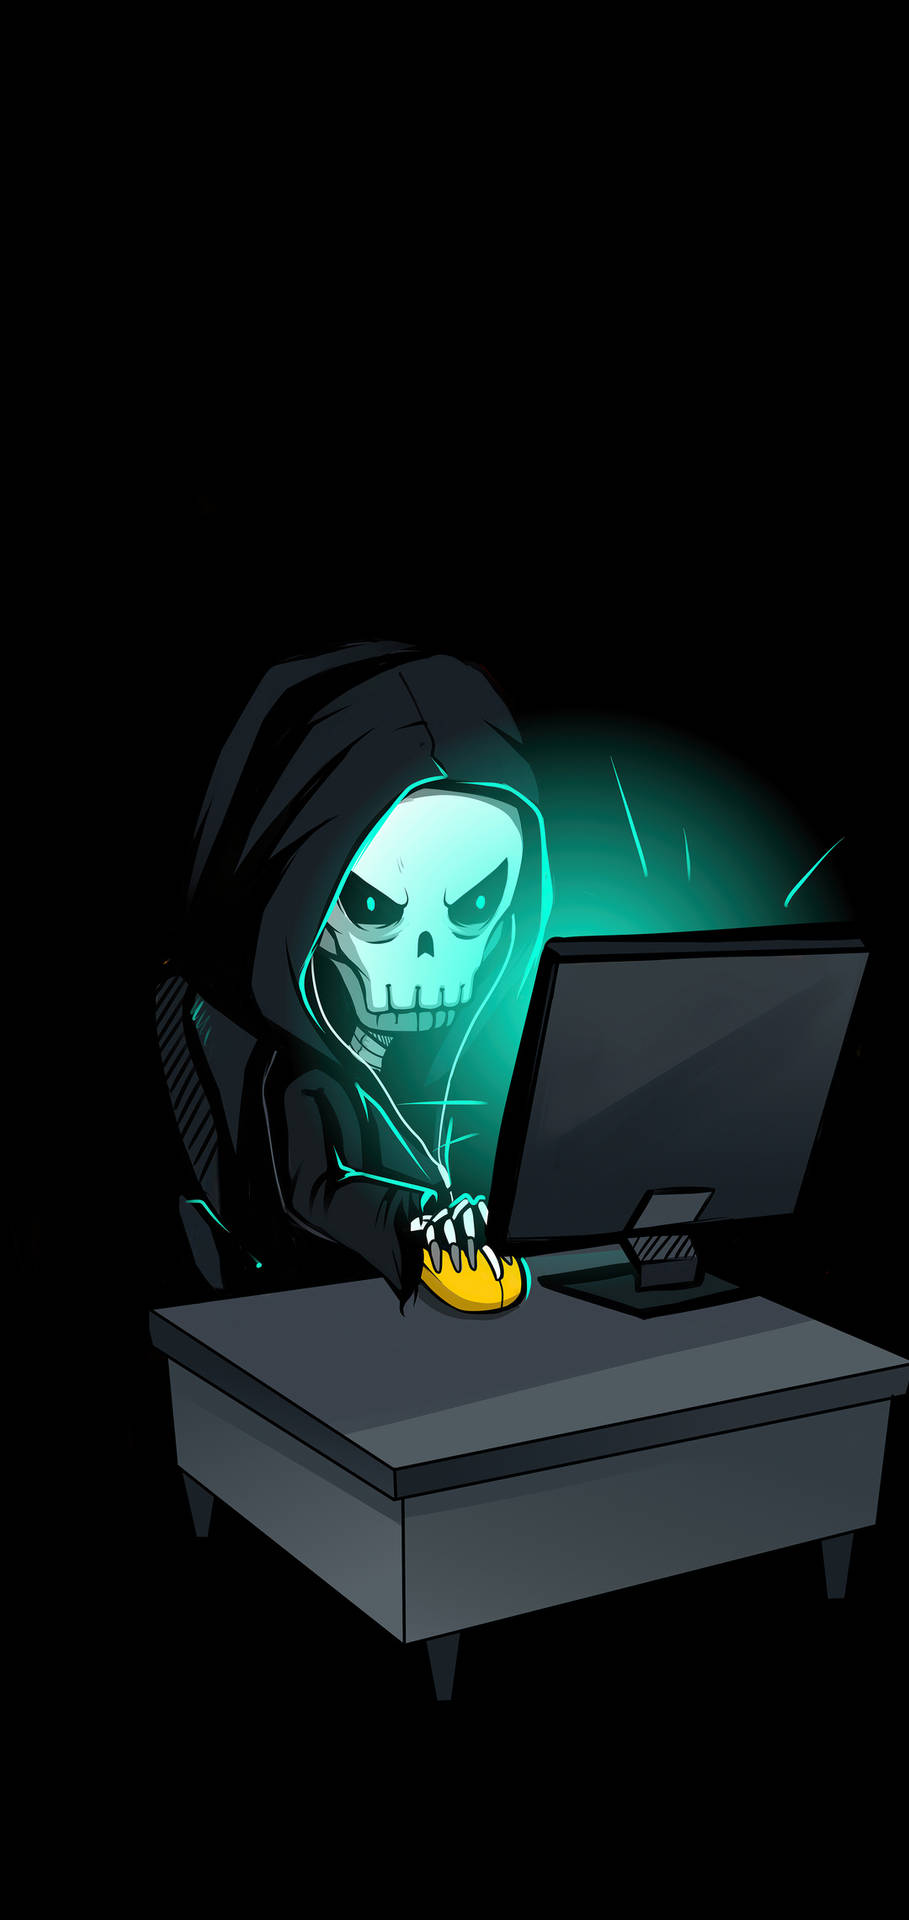 Graphic Skull With Computer Hacking Android Wallpaper